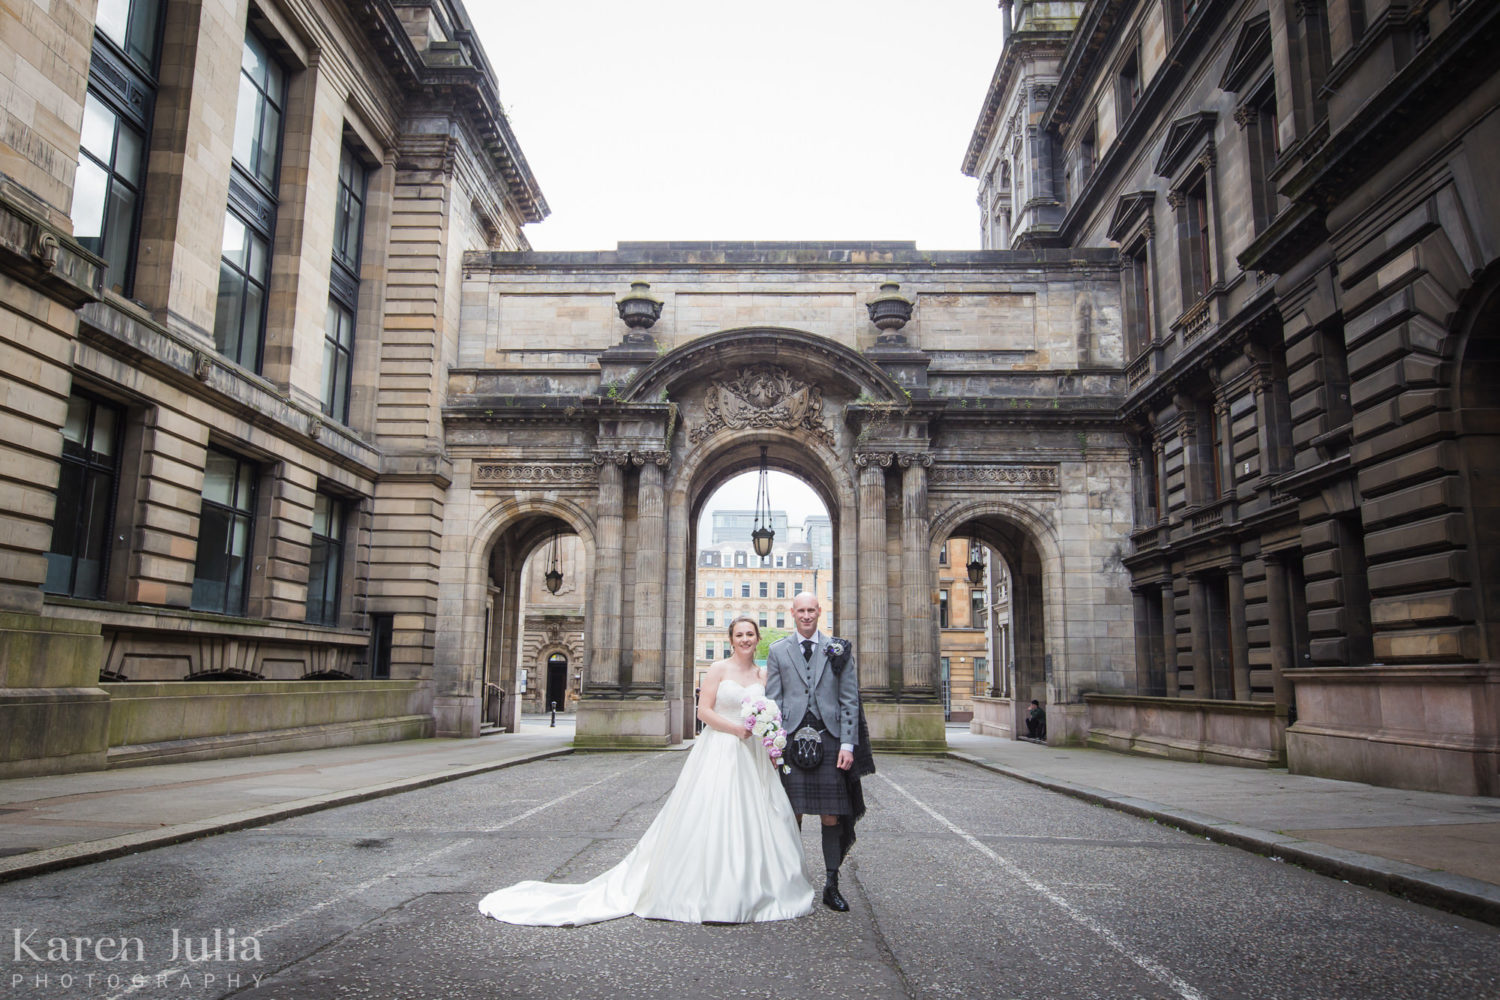 bride and groom portrait in John Street in front of the arches on their wedding day.